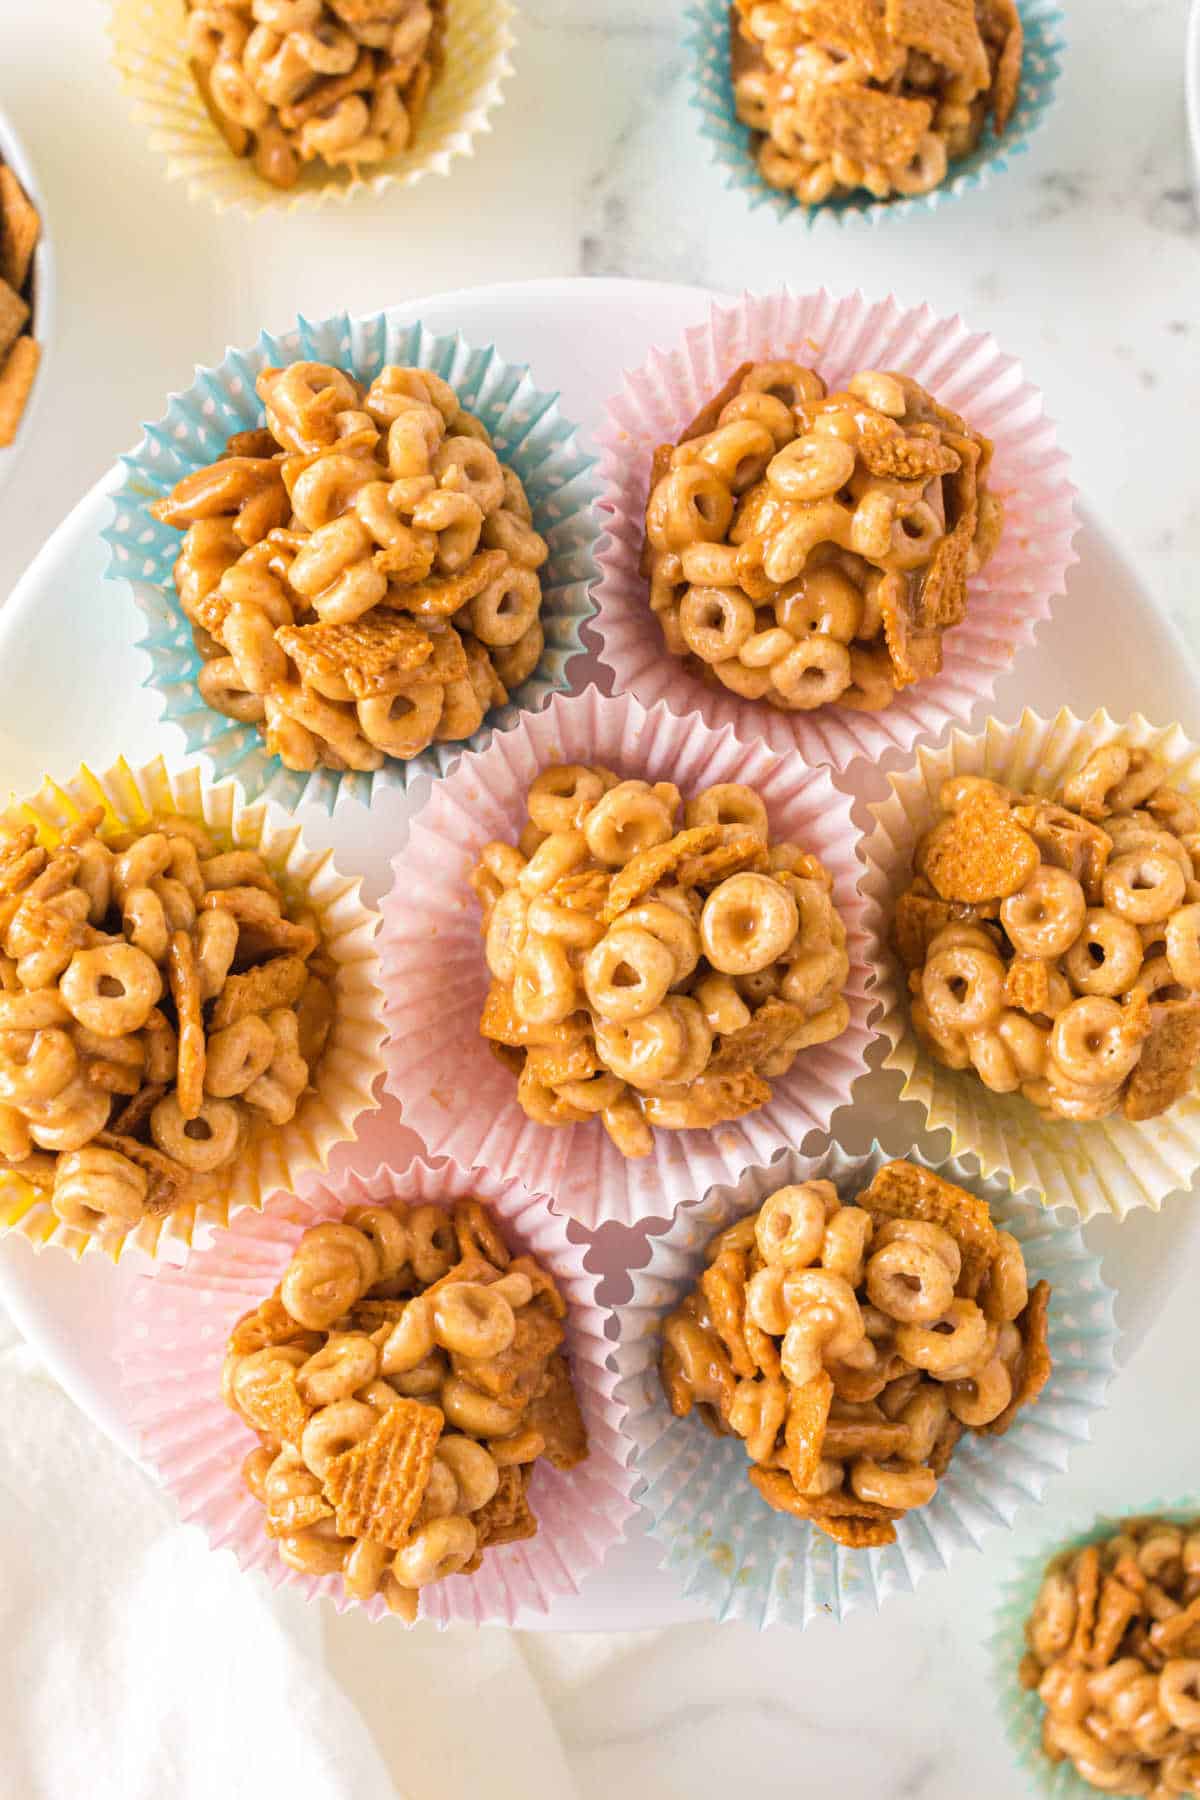 A group of peanut butter Cheerio balls on a plate.